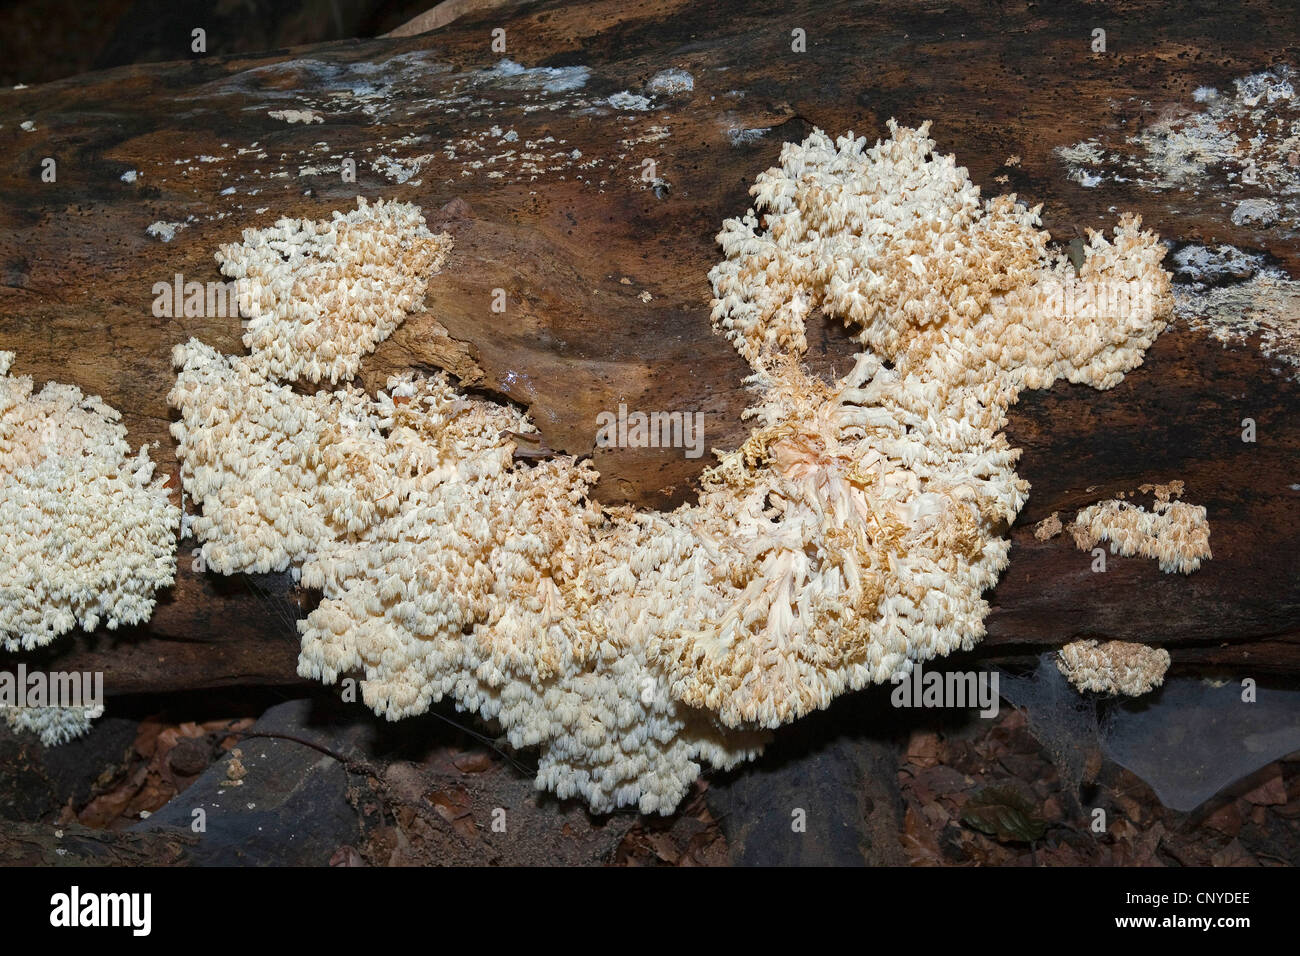 coral tooth (Hericium coralloides, Hericium clathroides), on dead wood, Germany Stock Photo